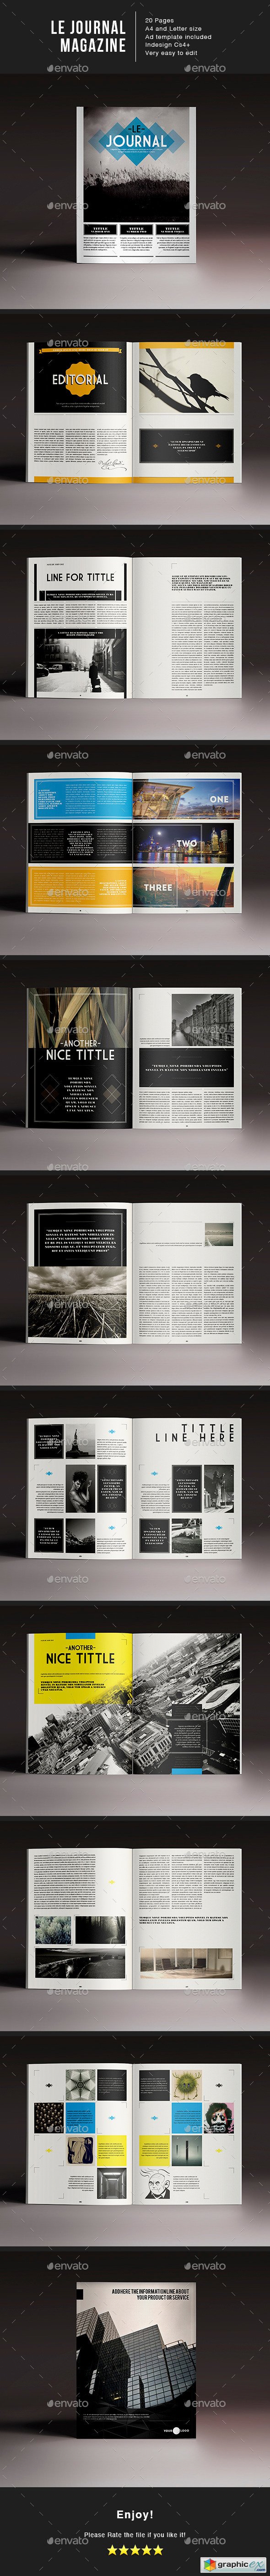 Le Journal Magazine Indesign Template